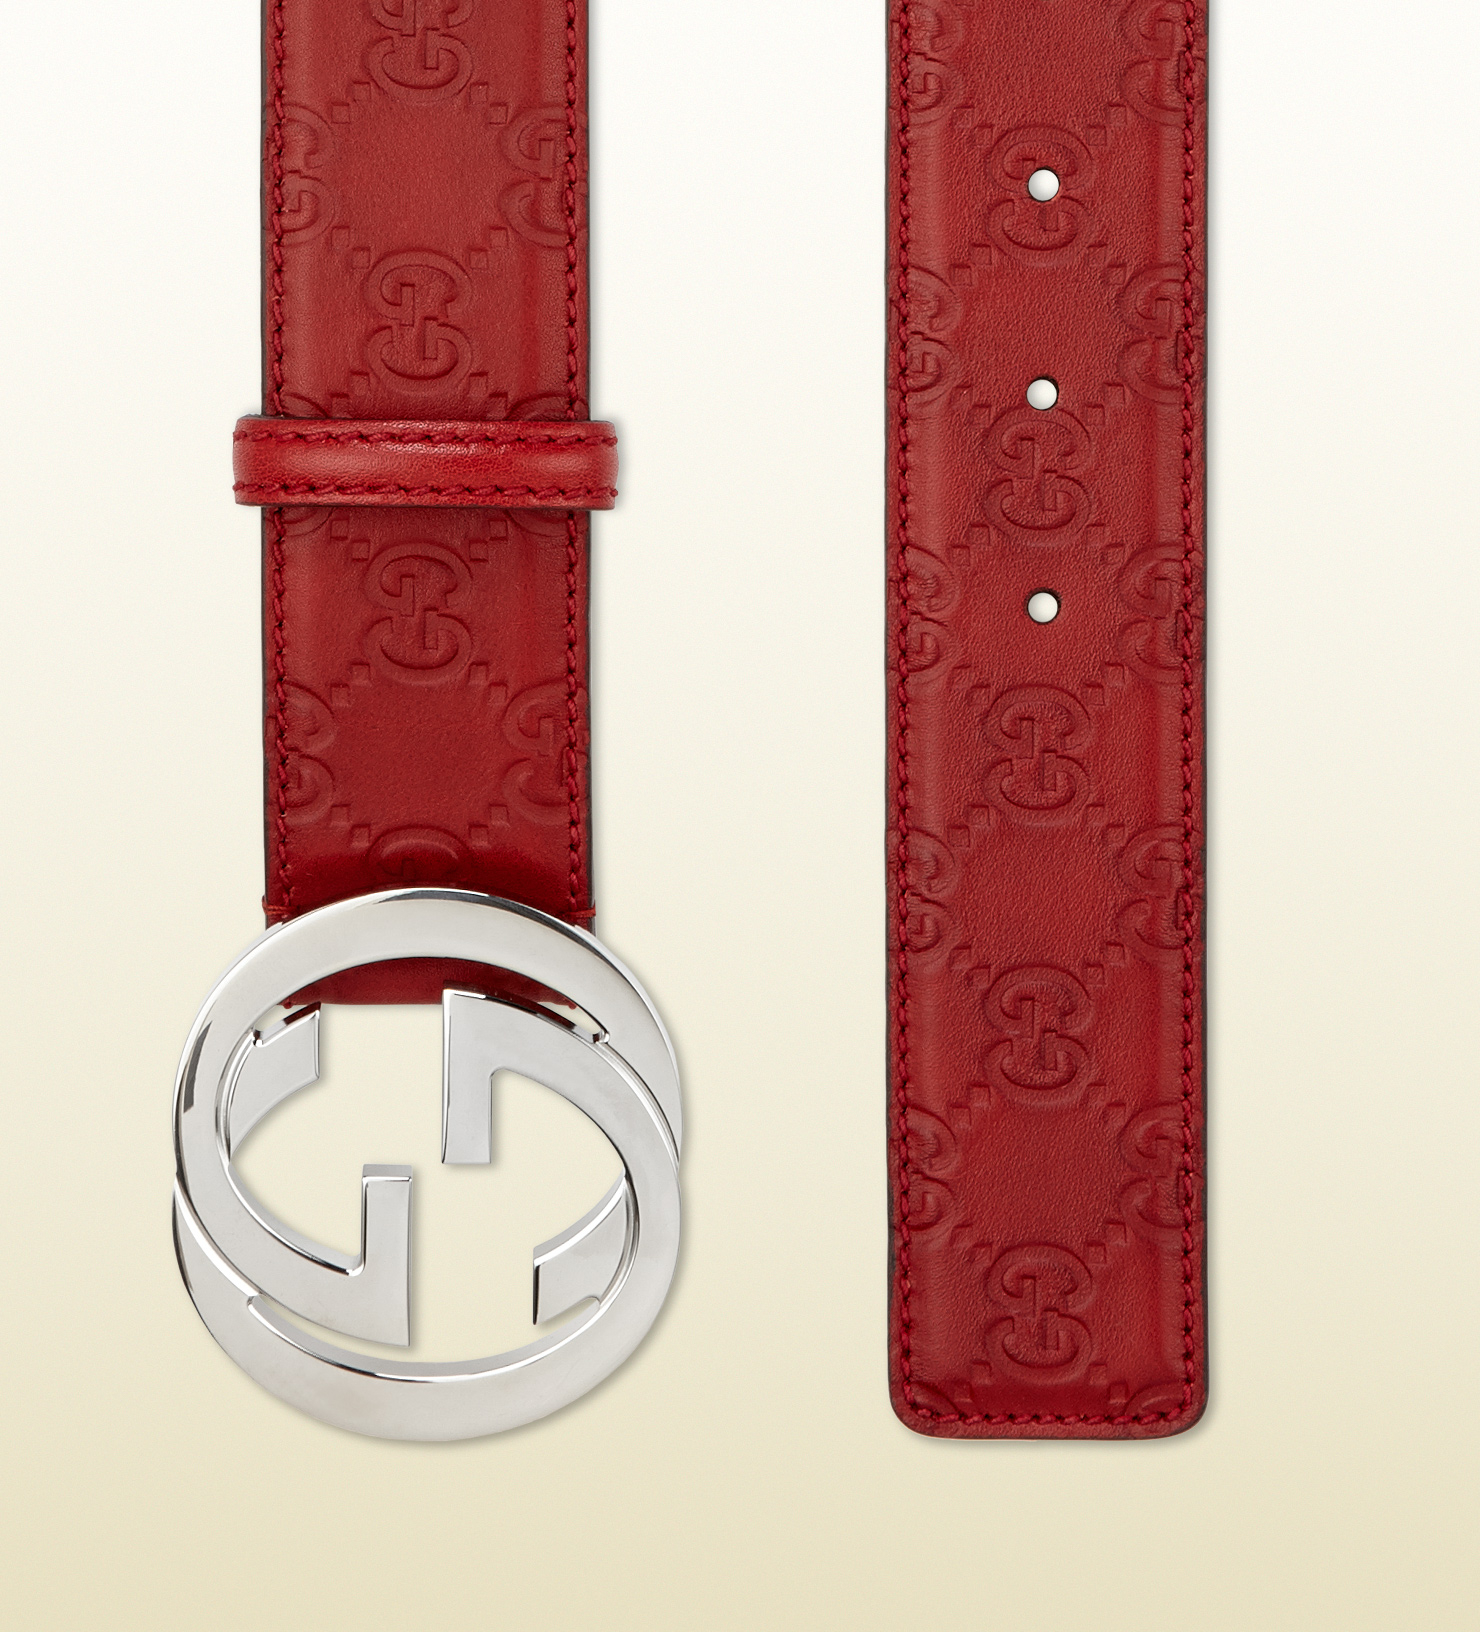 Lyst - Gucci Belt With Interlocking G Buckle in Red for Men